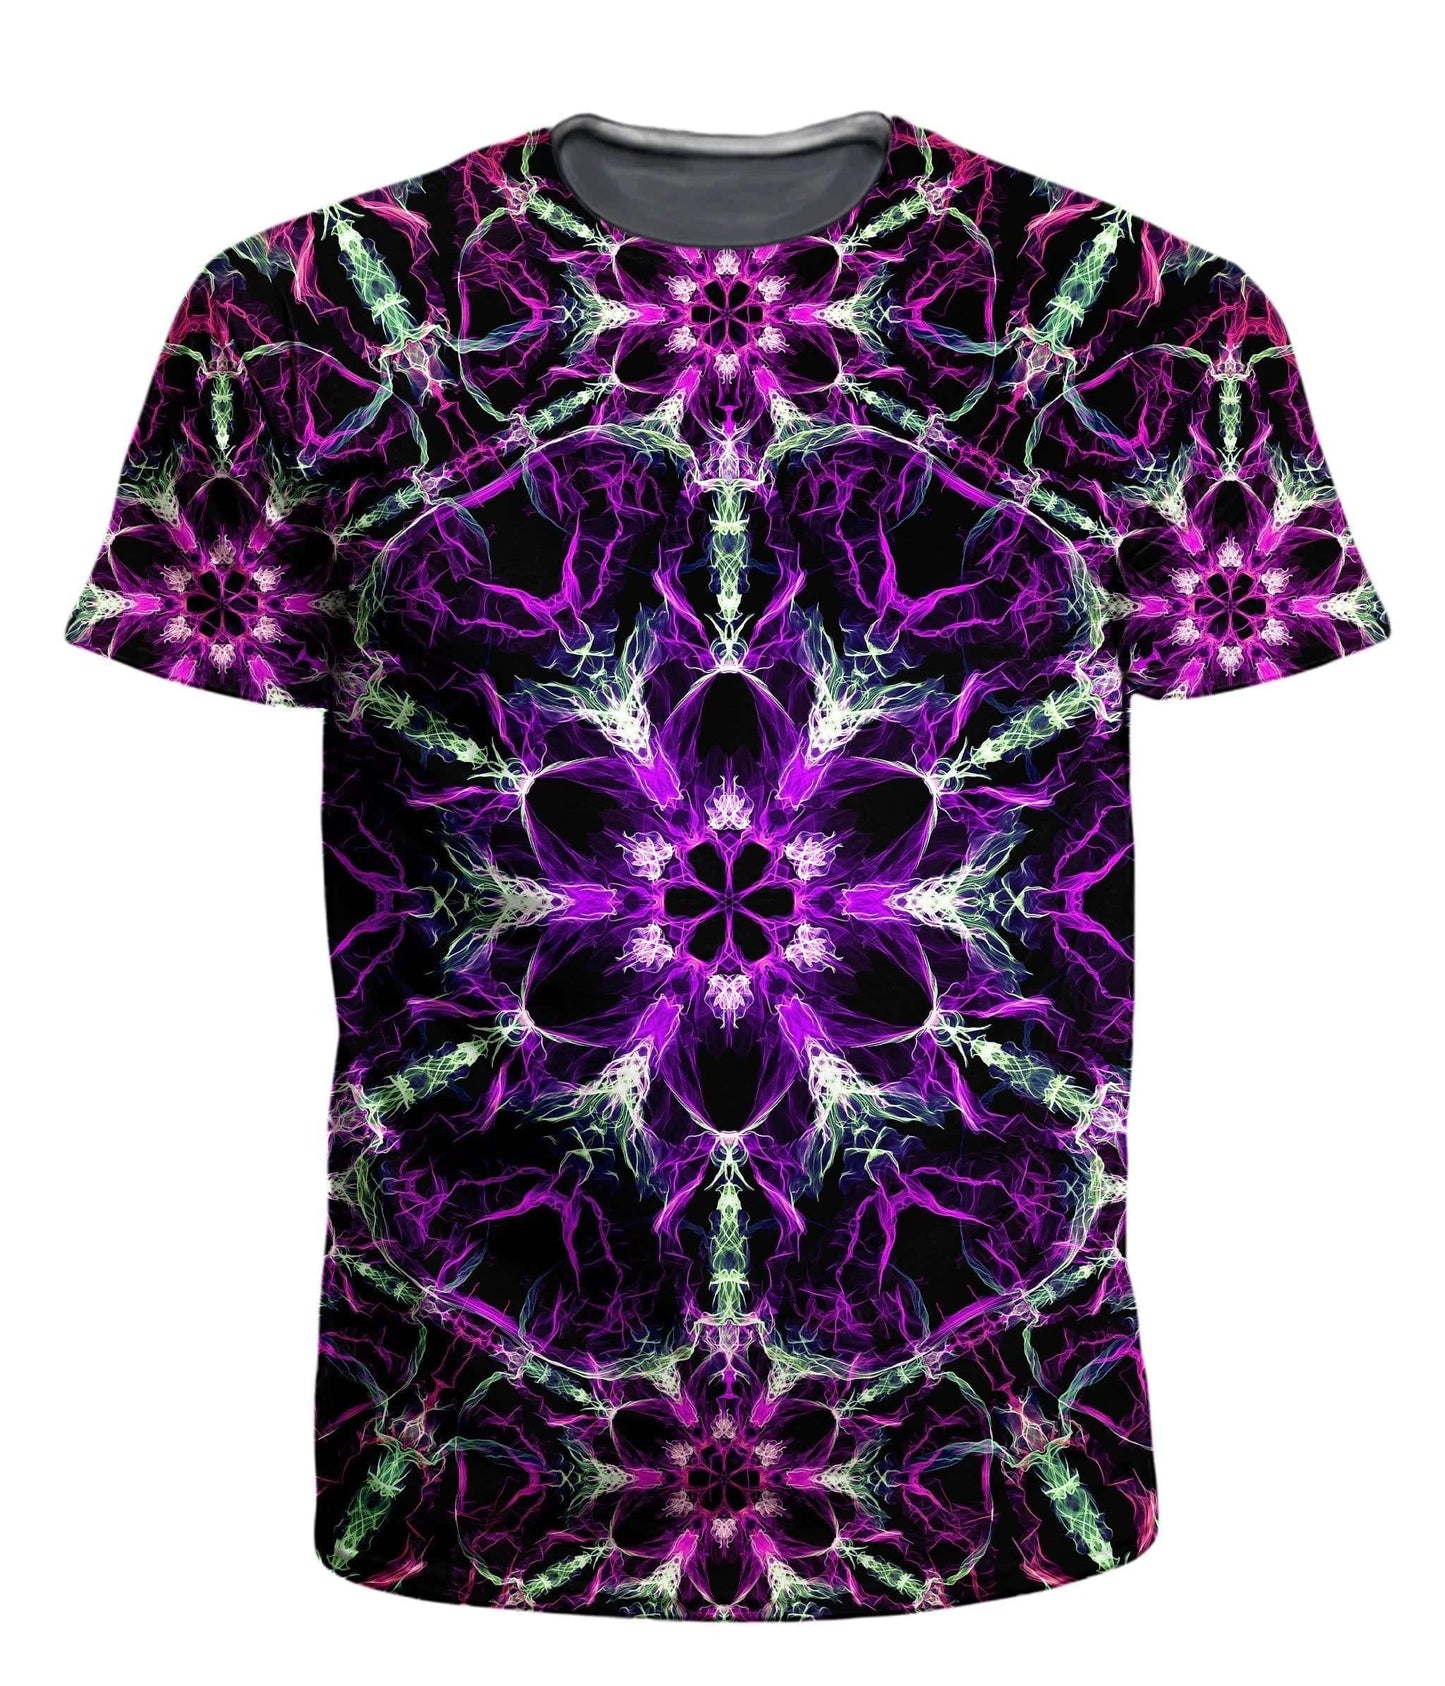 Psyched T-Shirt and Shorts Combo, Yantrart Design, | iEDM